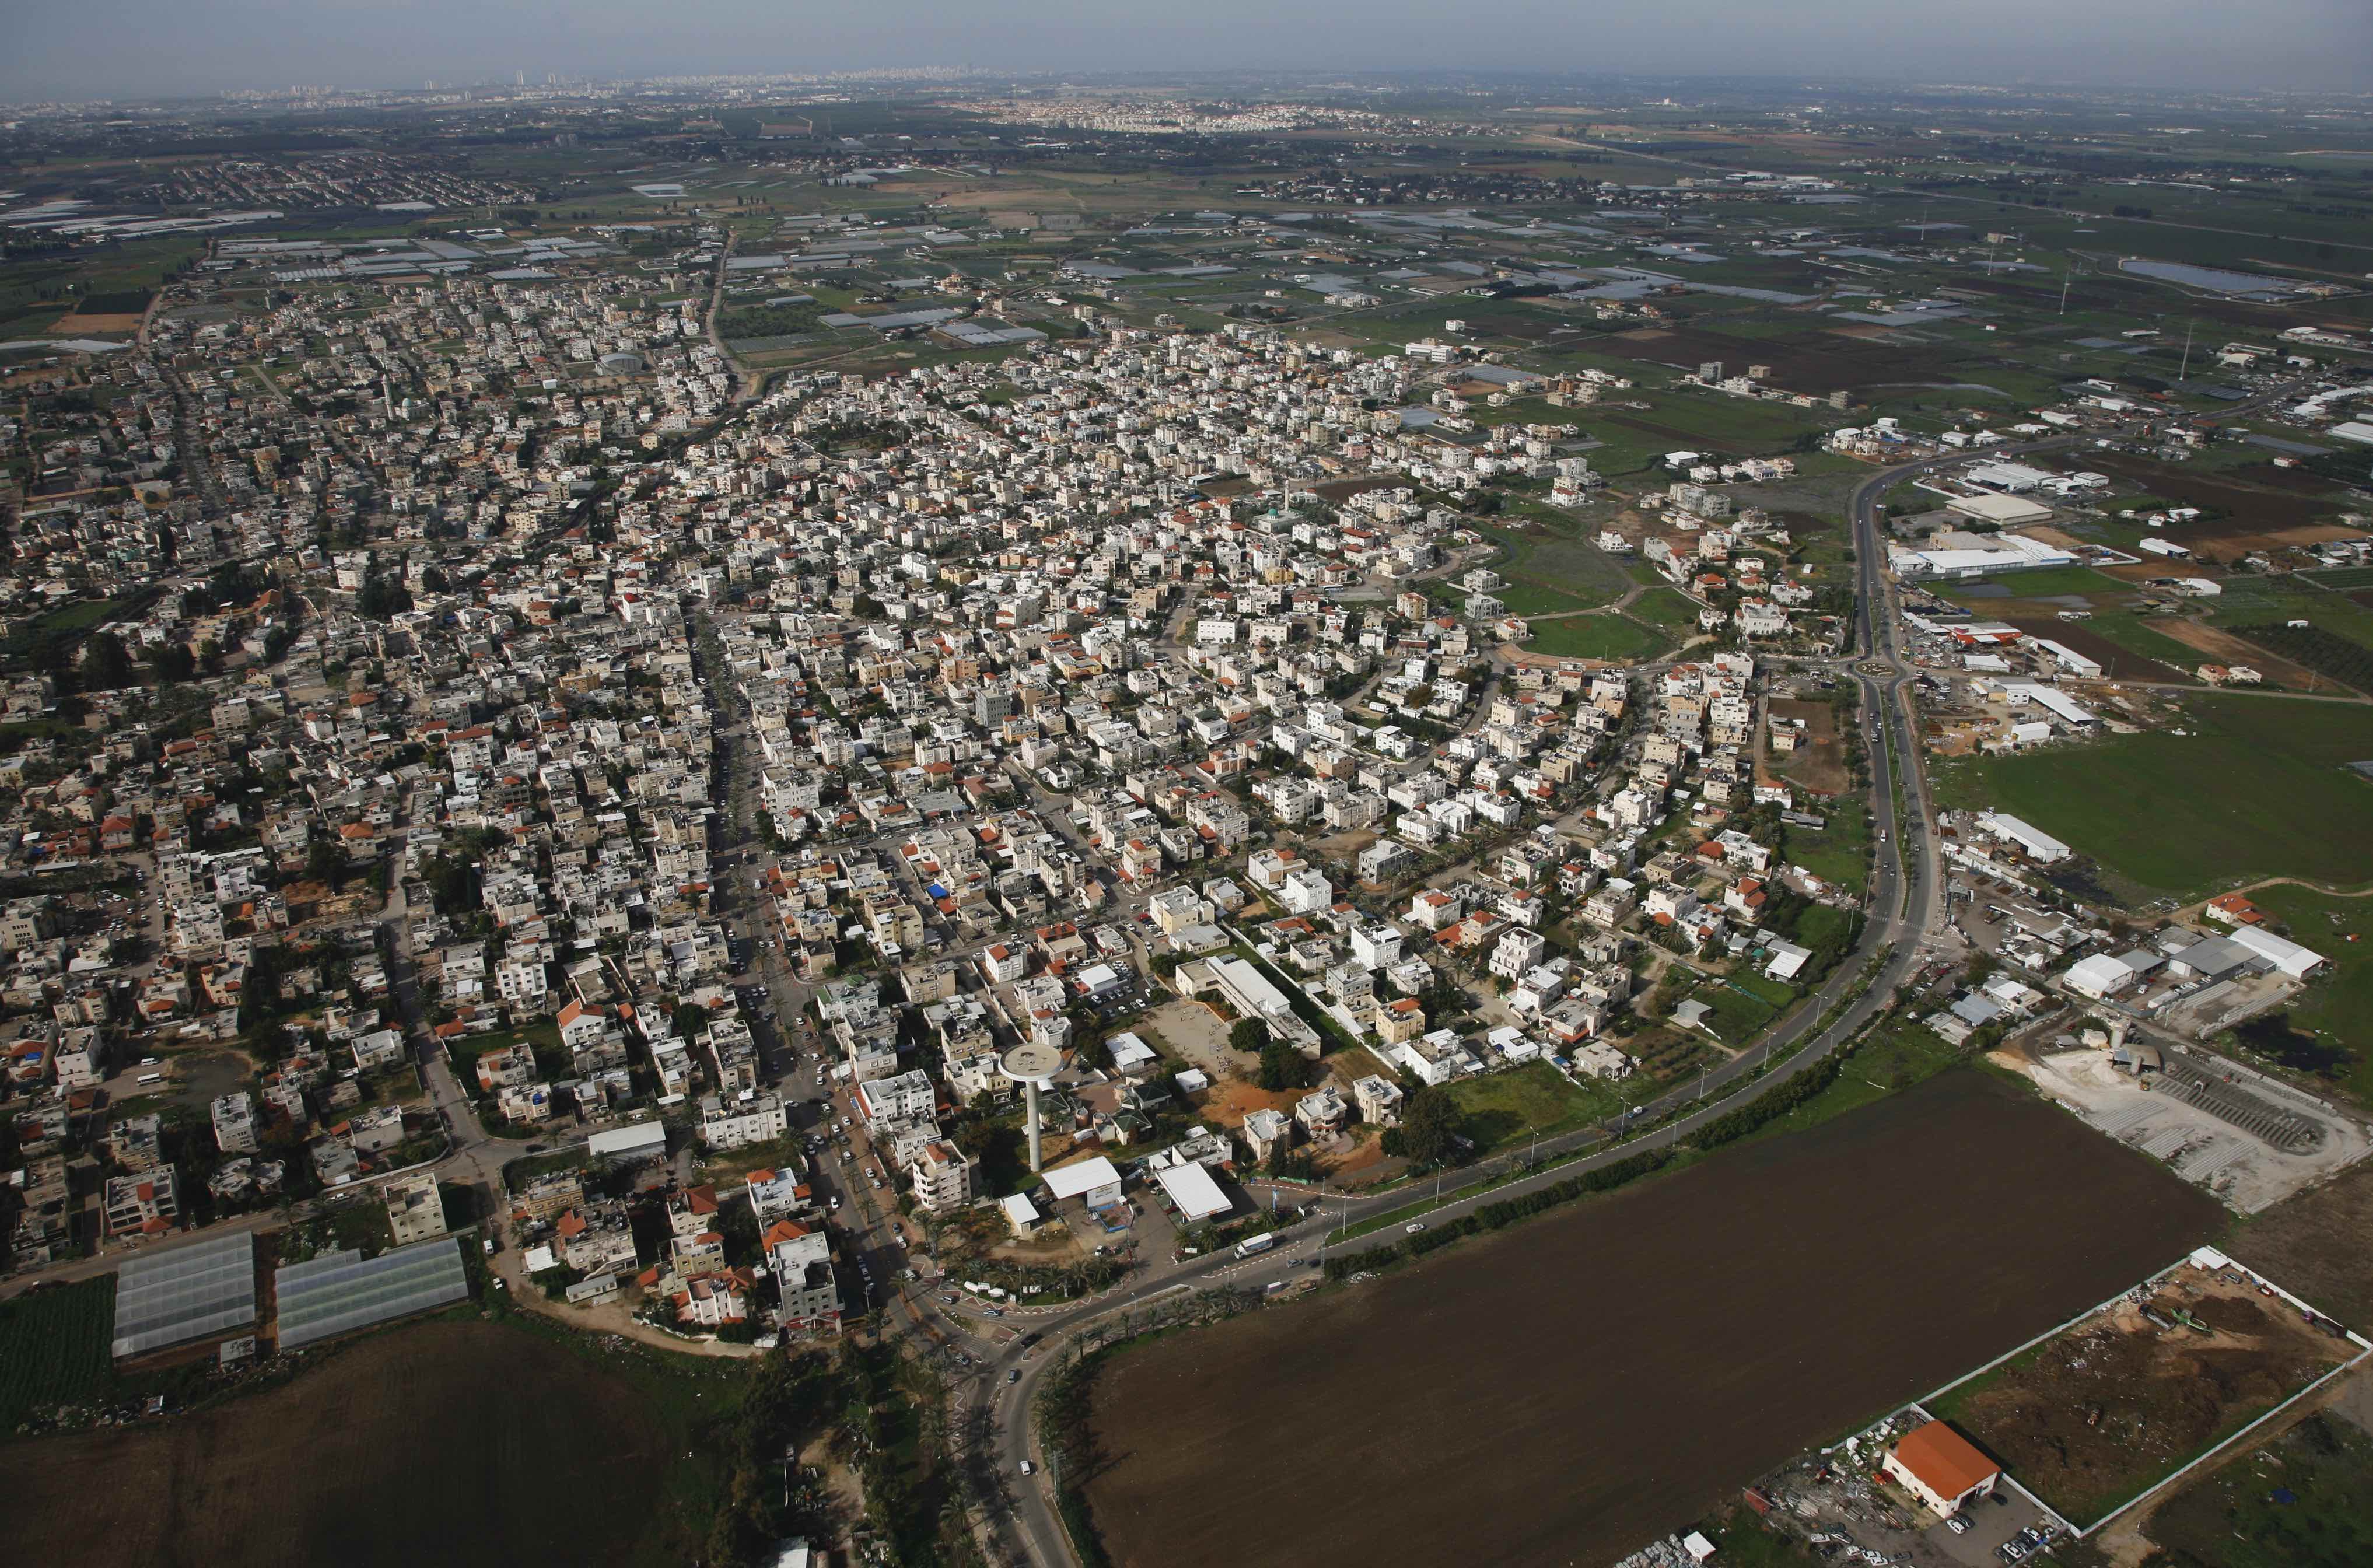 The dense residential core of Qalansawa, a Palestinian town in central Israel, with its lands zoned for agricultural use in the background. Aerial photography taken between 2011 and 2015.